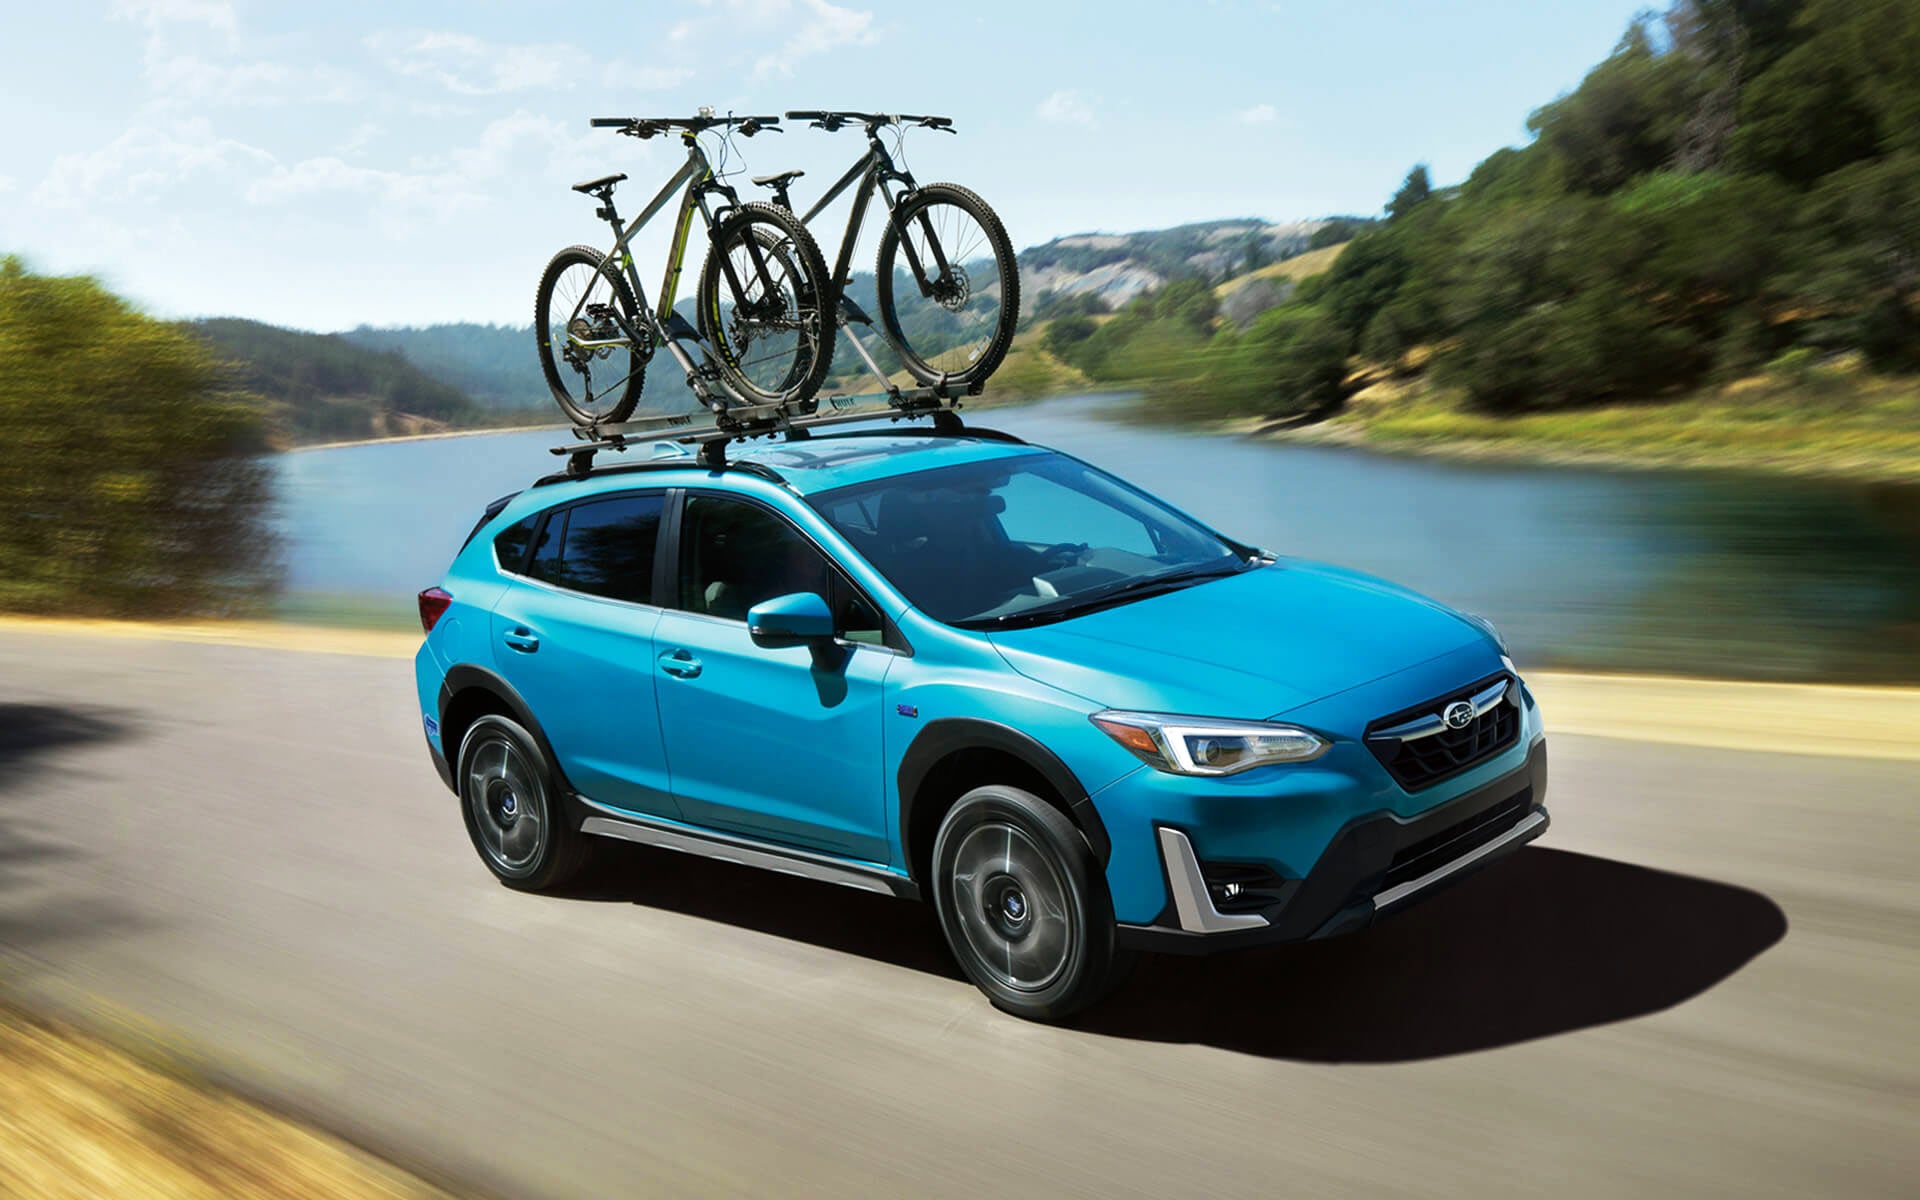 A blue Crosstrek Hybrid with two bicycles on its roof rack driving beside a river | Subaru of Ann Arbor in Ann Arbor MI